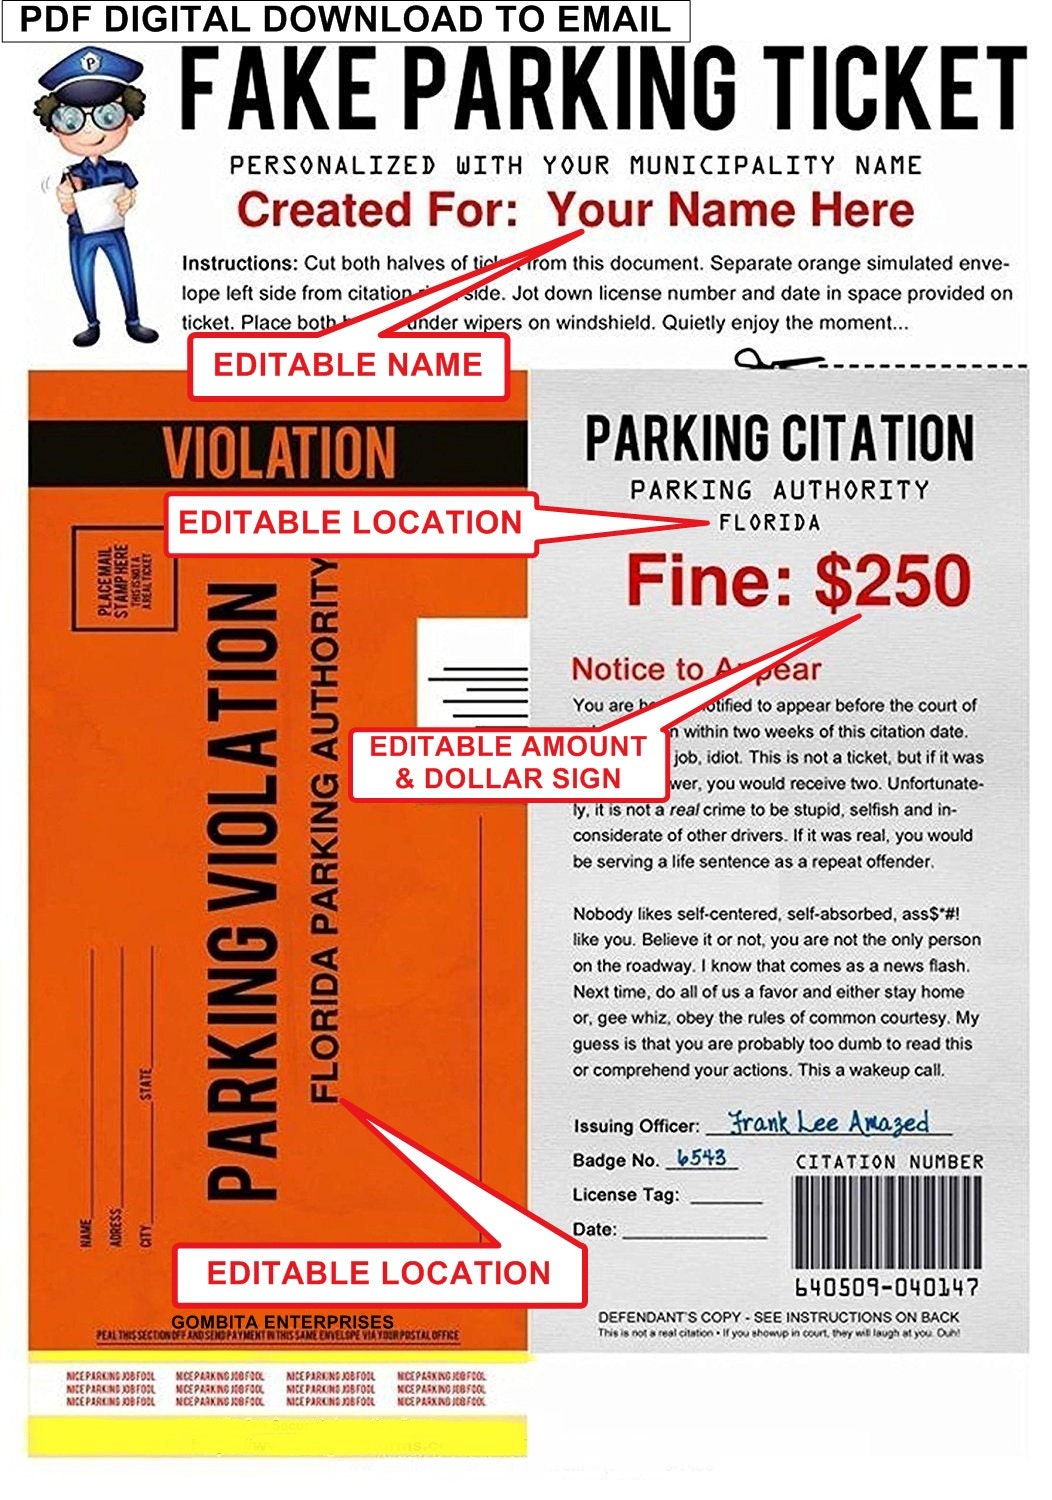 PDF Fake Parking Ticket What a Great Way To Play A